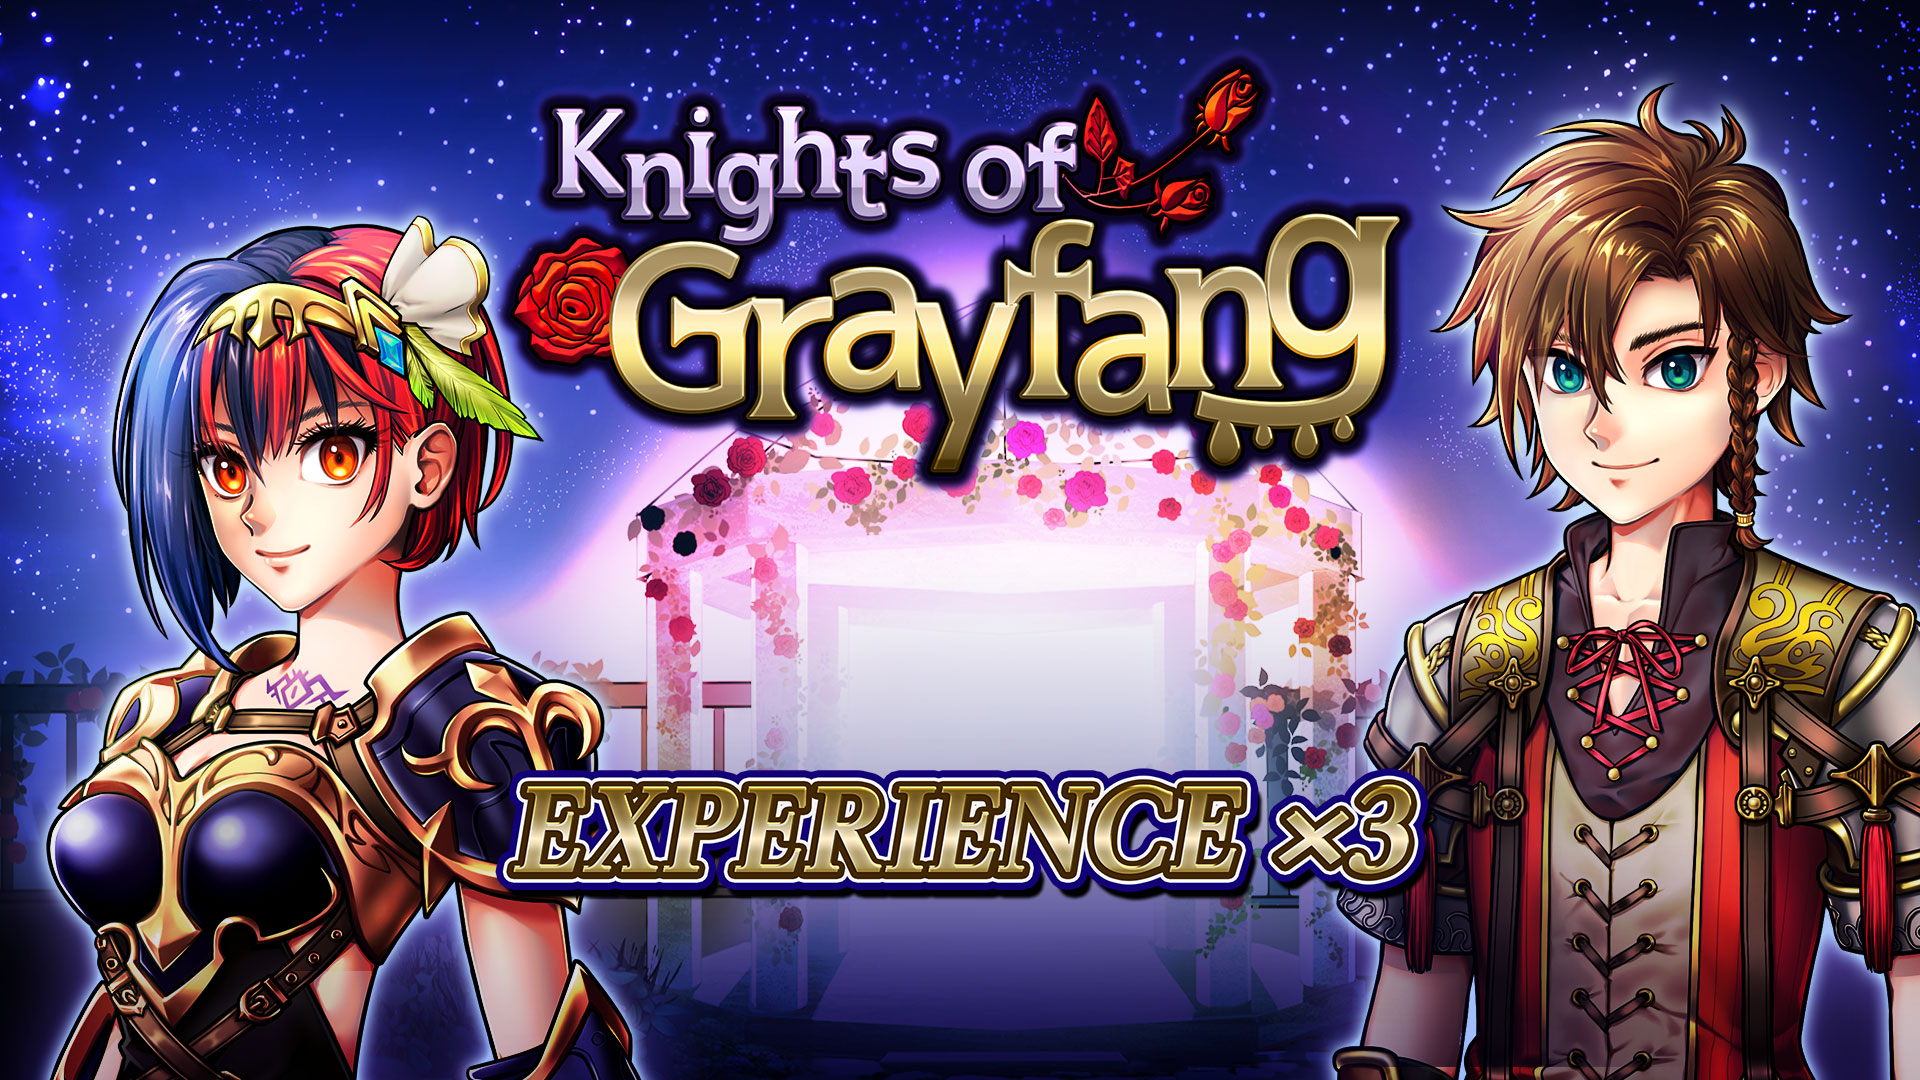 Experience x3 - Knights of Grayfang